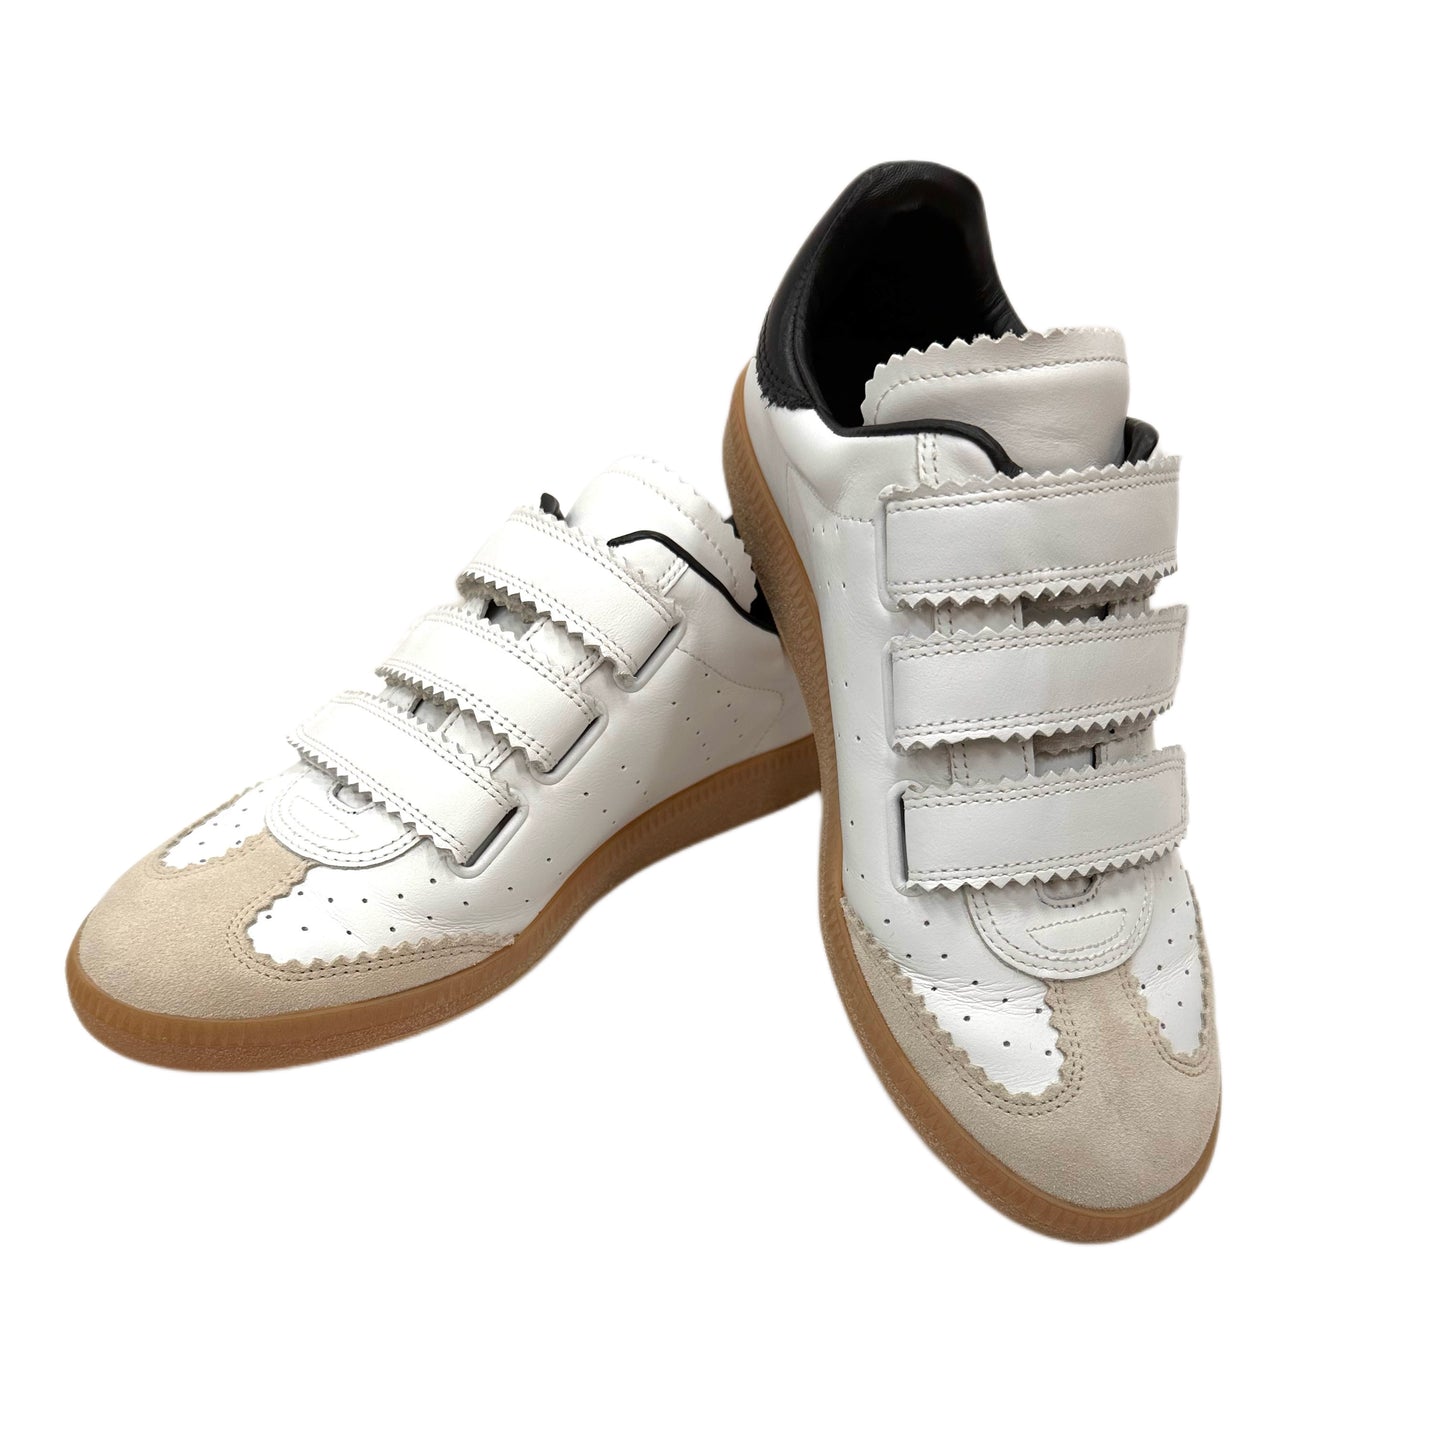 ISABEL MARANT Perforated Grip Strap Sneakers Size 38